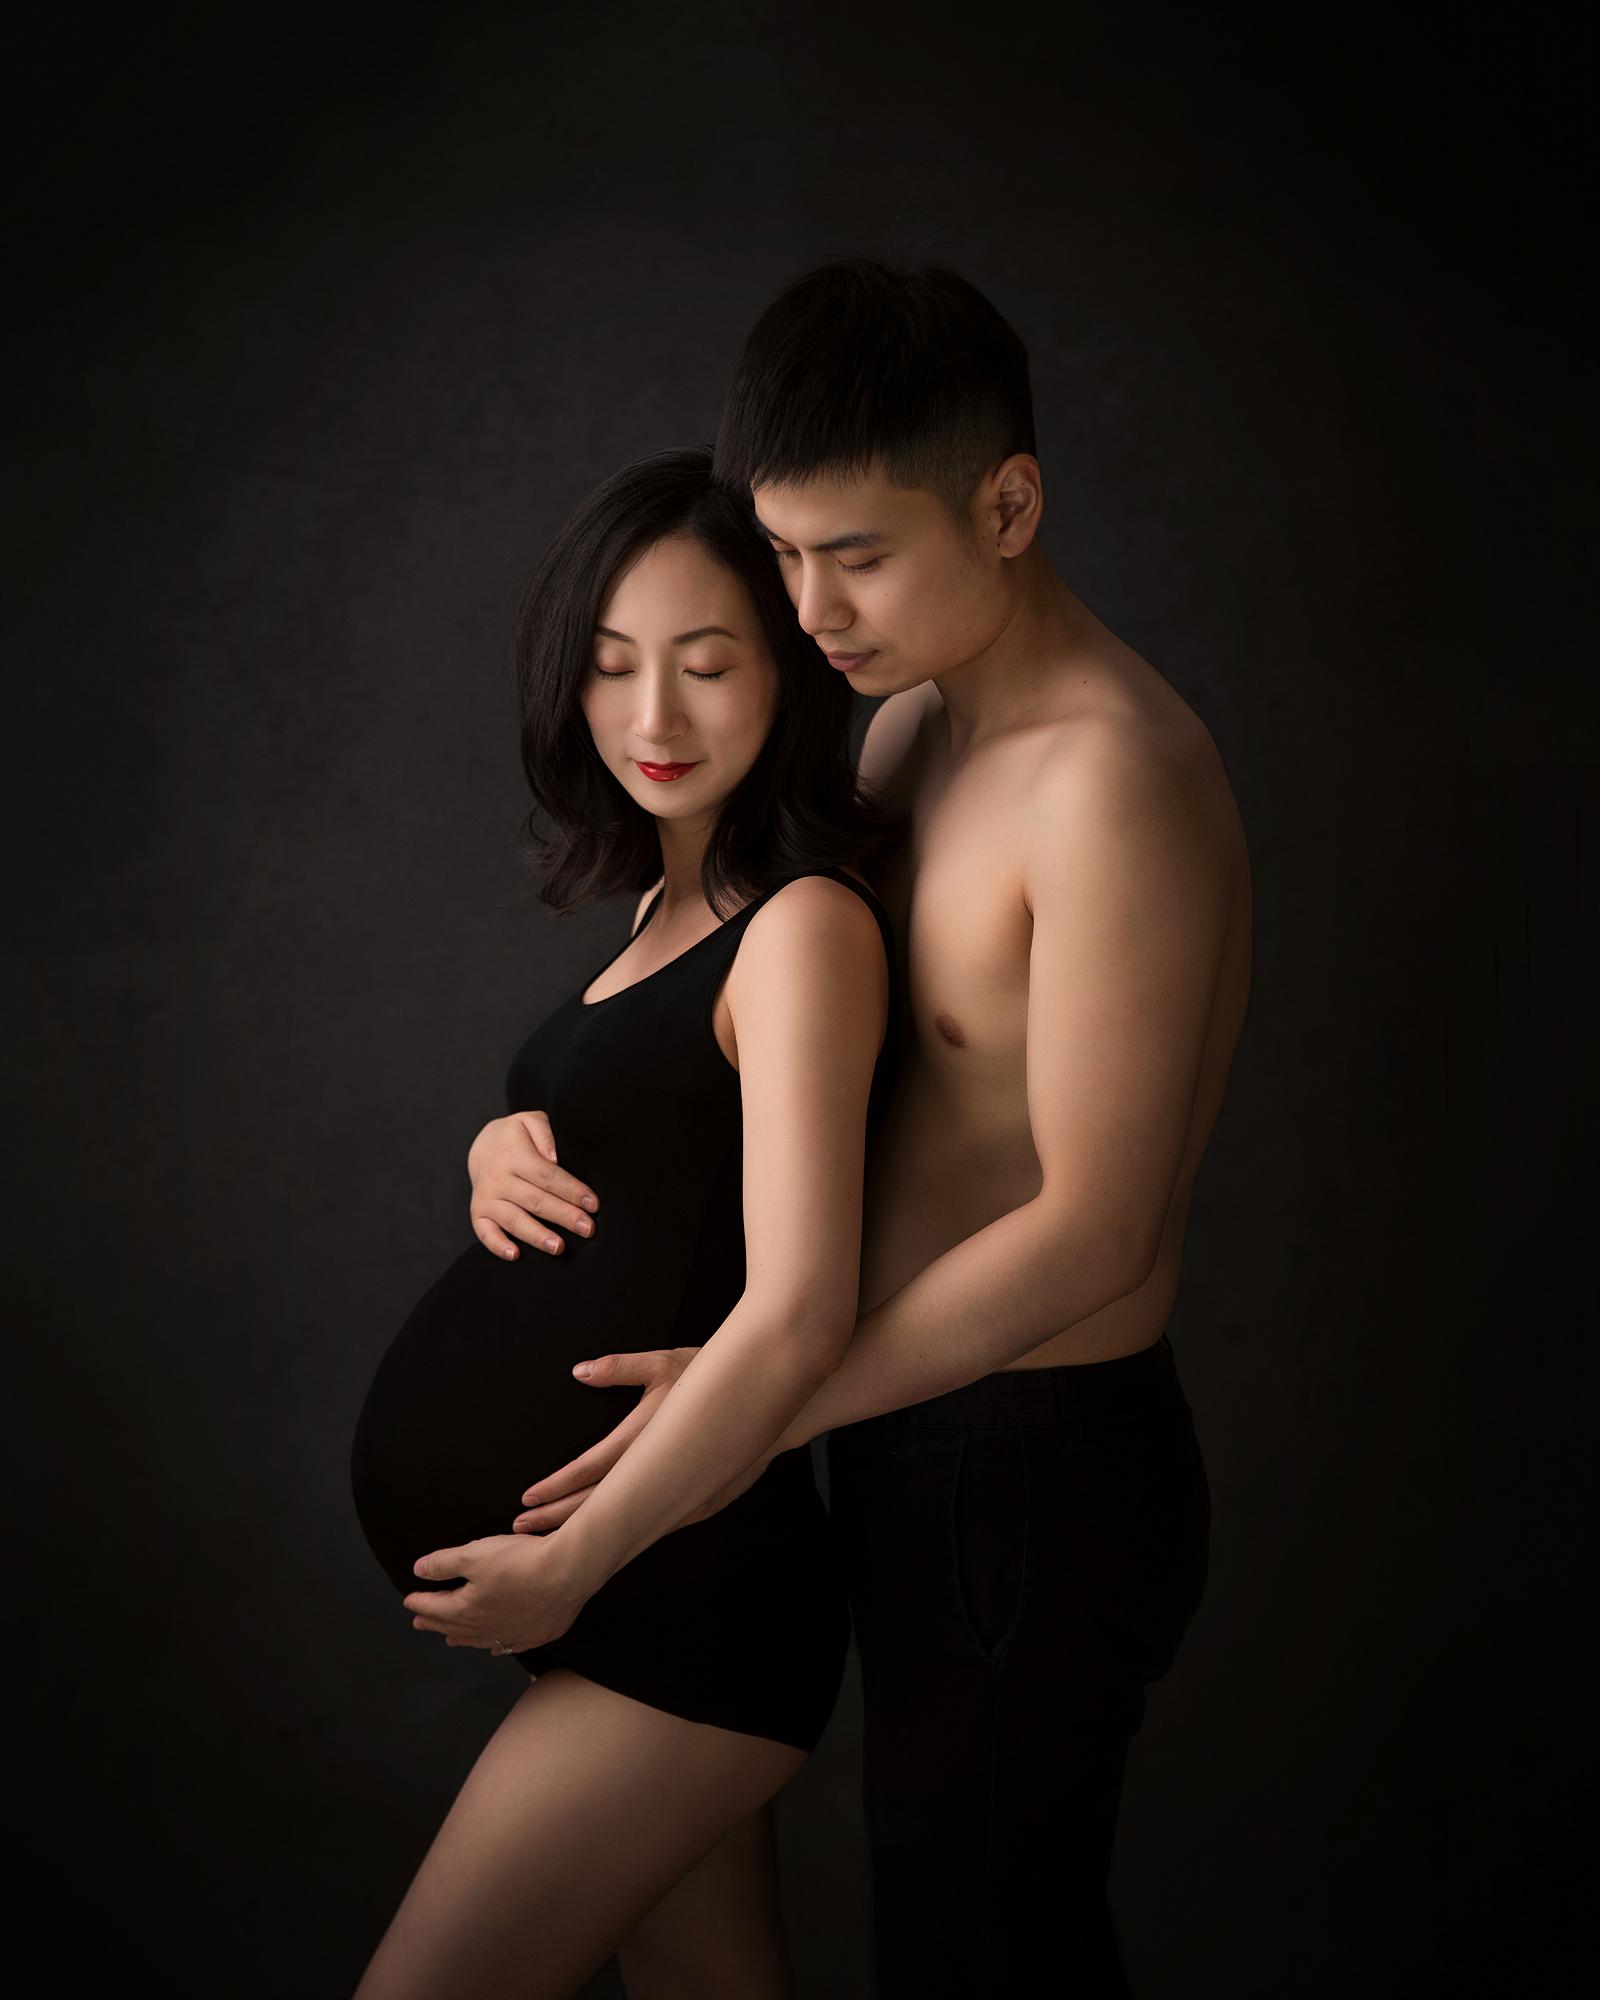 Pregnant lady is cuddled by her husband during maternity photoshoot